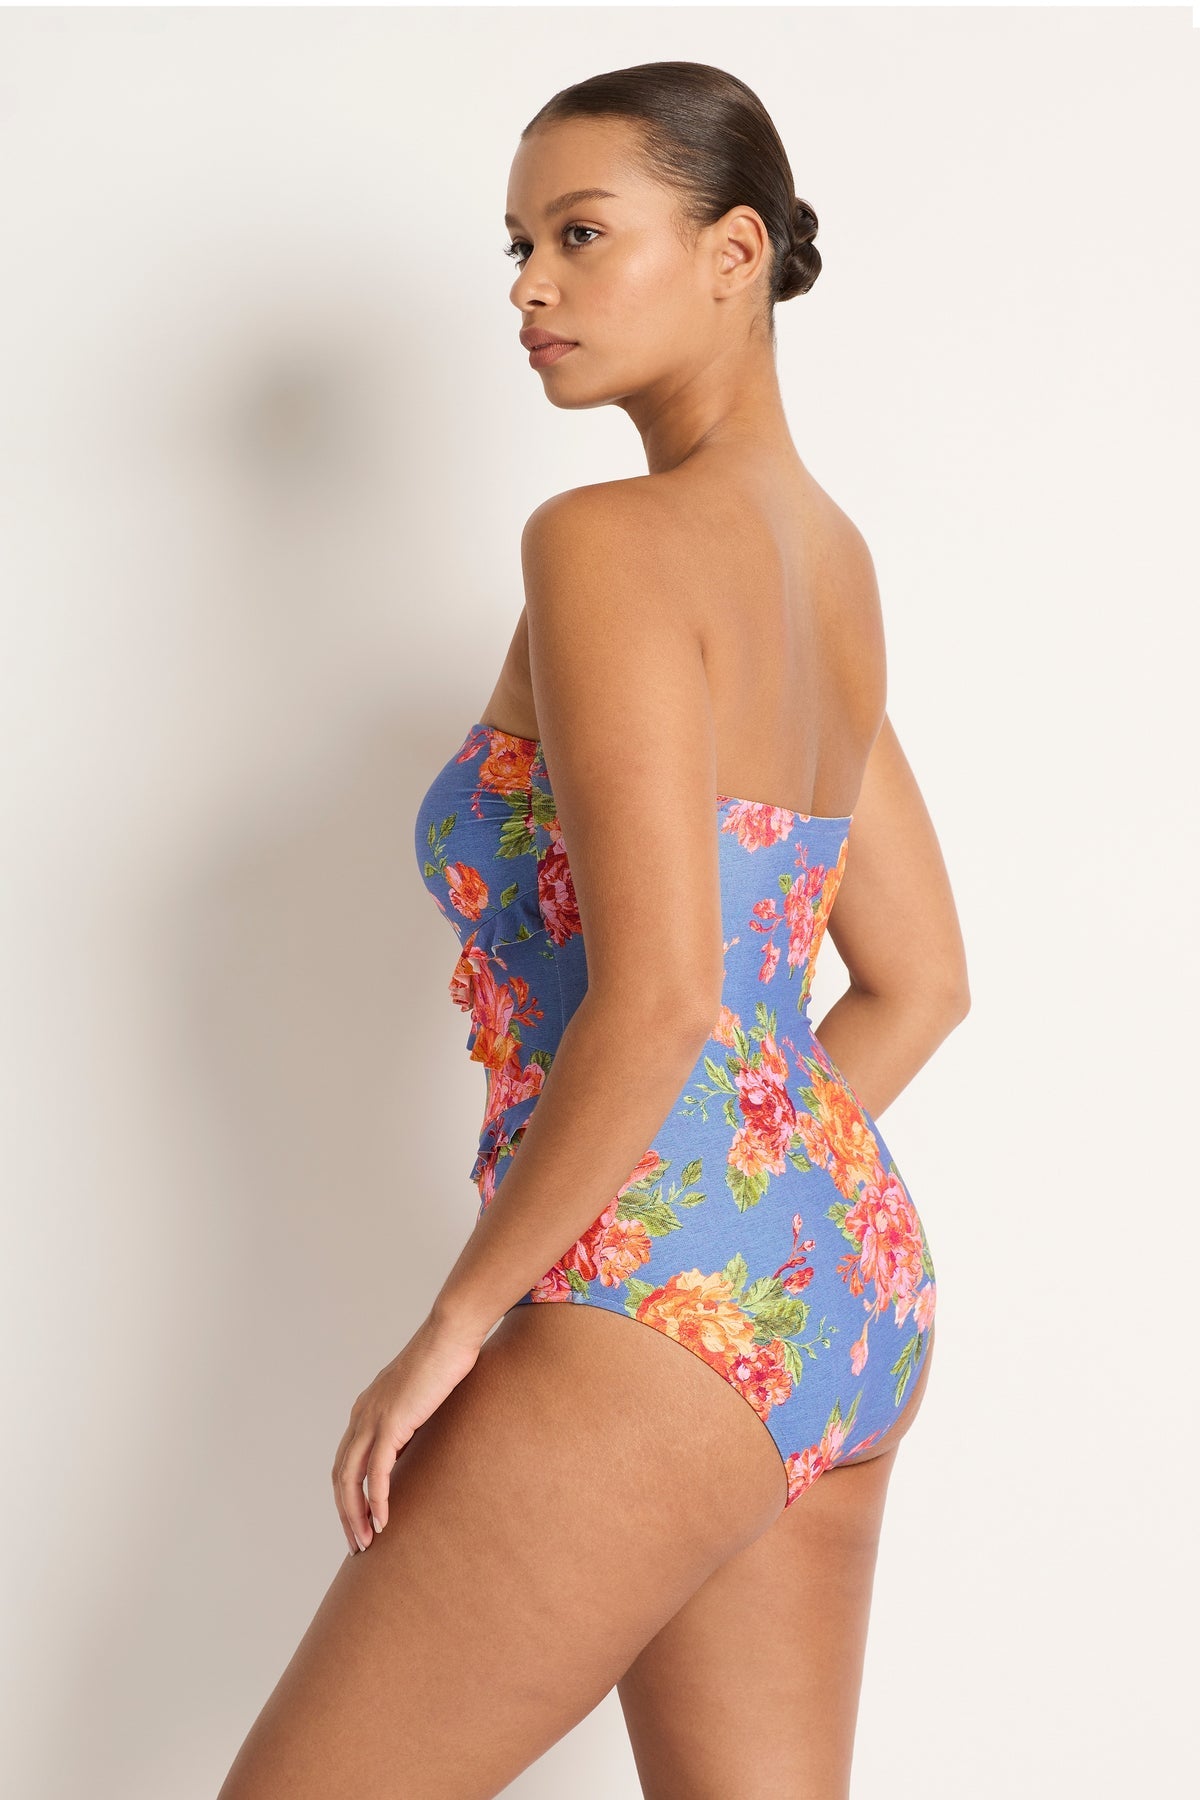 vintage inspired floral with a pop of pink One Piece